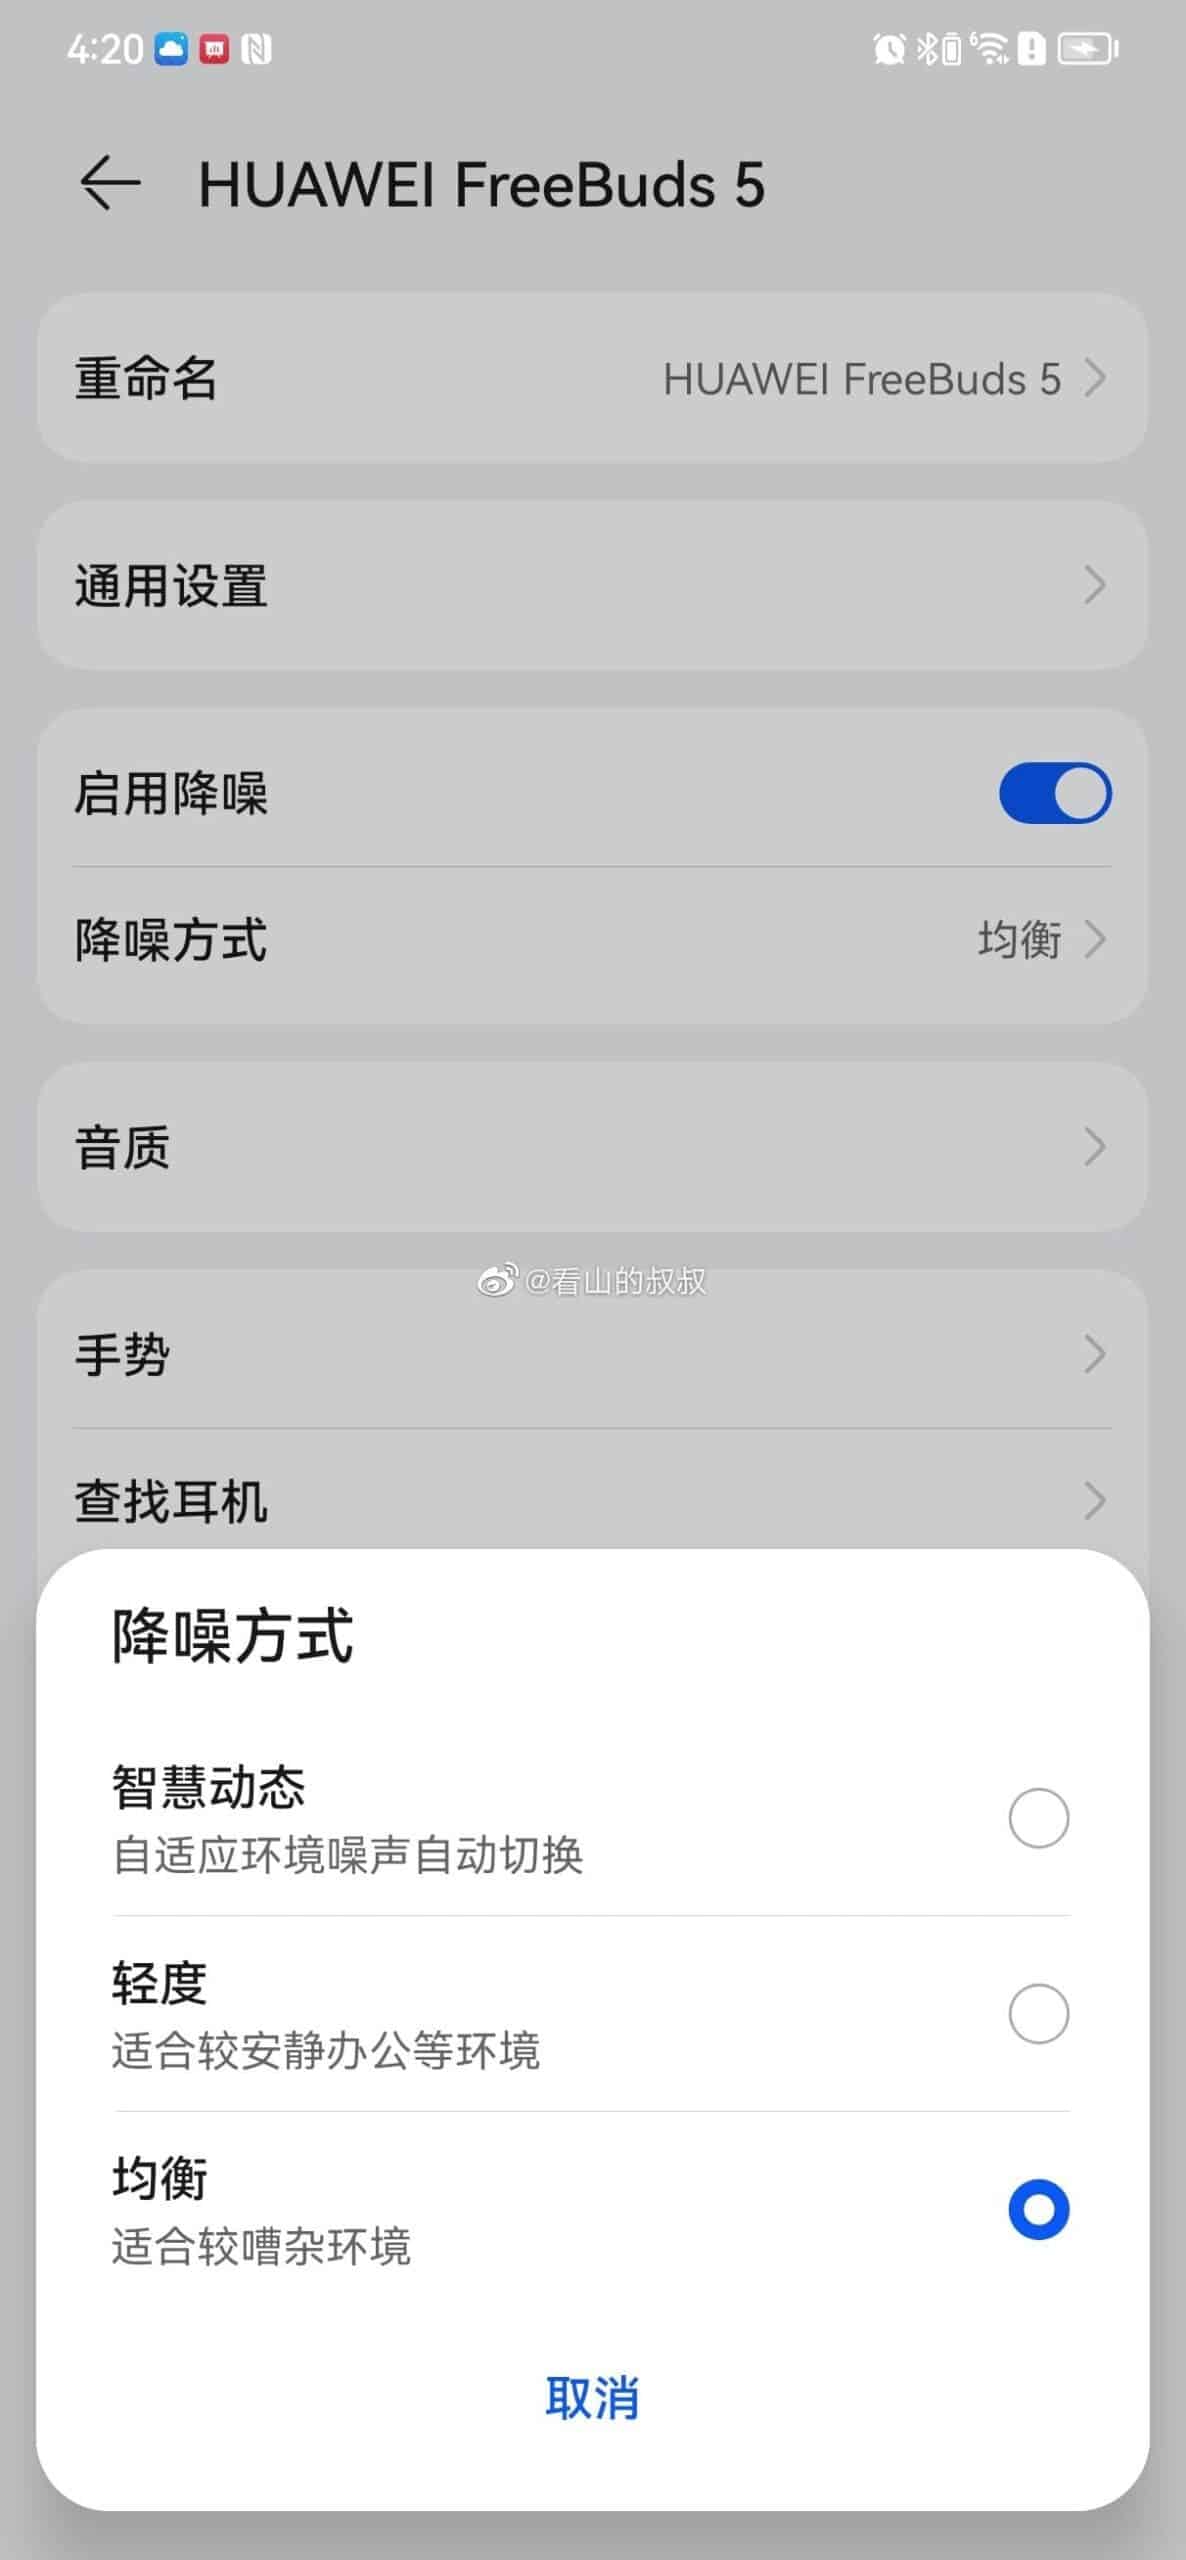 Huawei FreeBuds 5 features